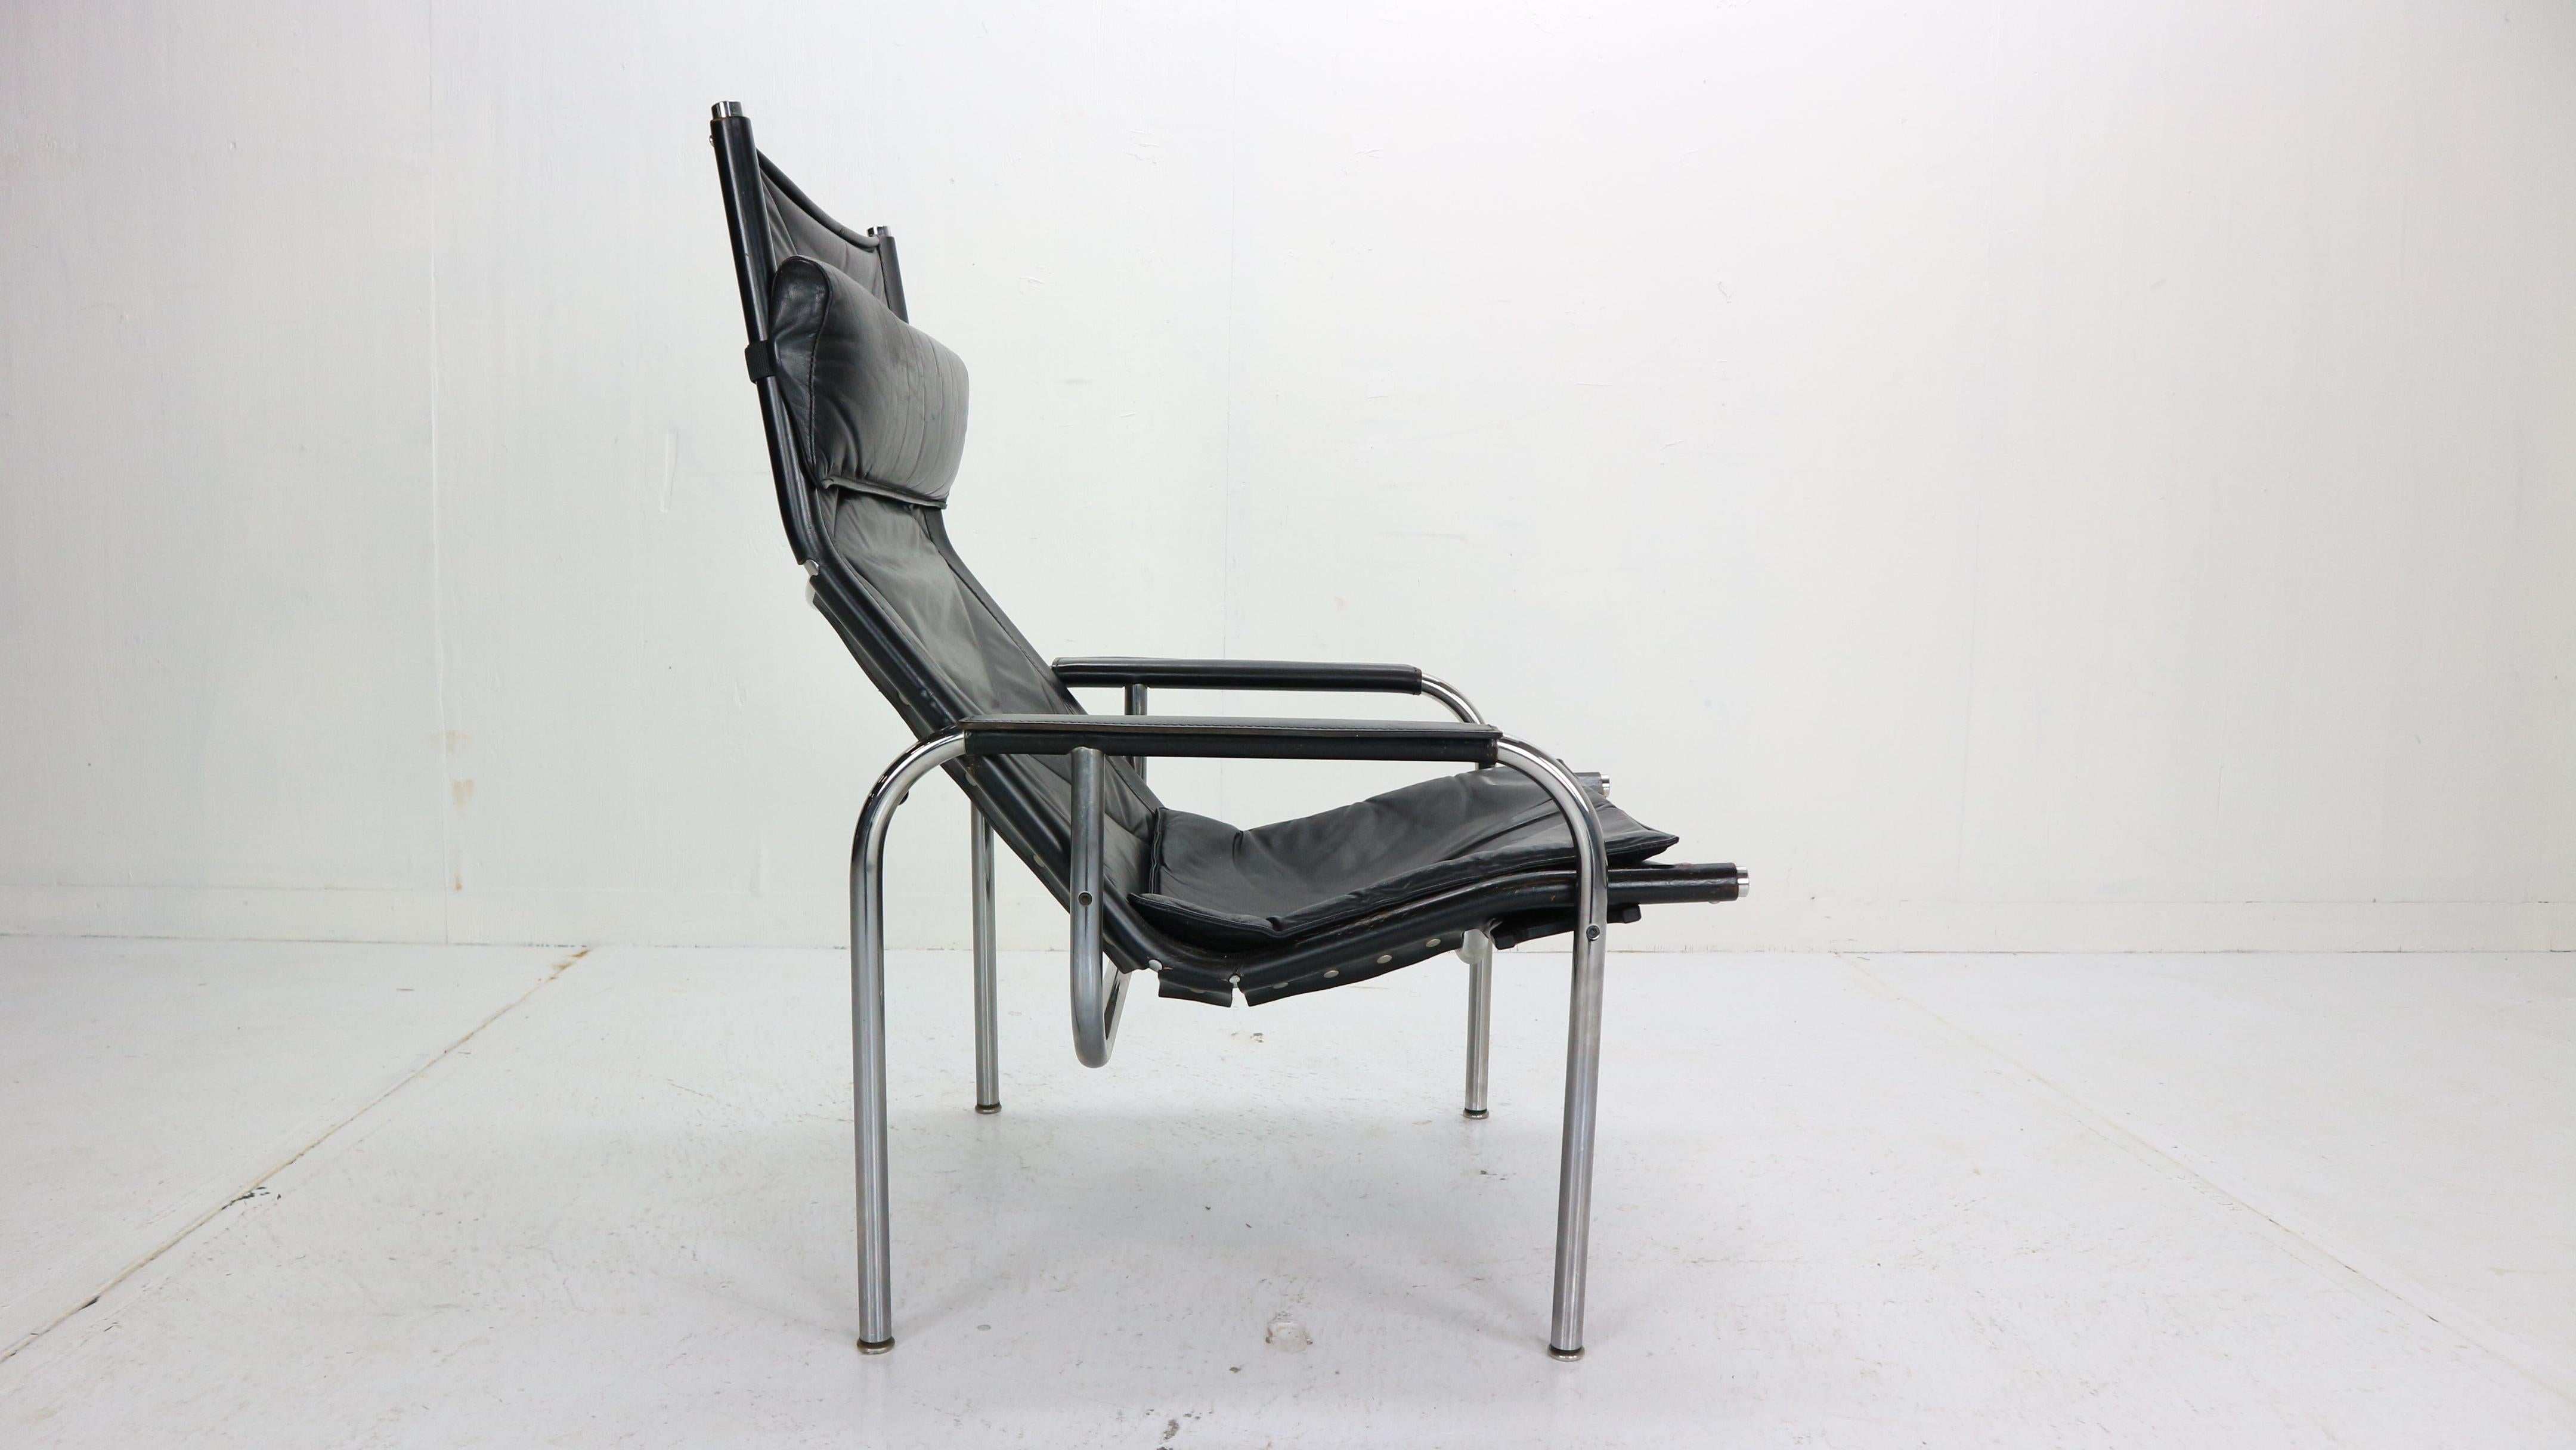 Hans Eichenberger easy chair for Strassle designed in 1978 Switzerland.

This lounge chair has chrome frame and stitched black harness leather, brass details in a very good vintage condition. The lounge chair can be set in three different